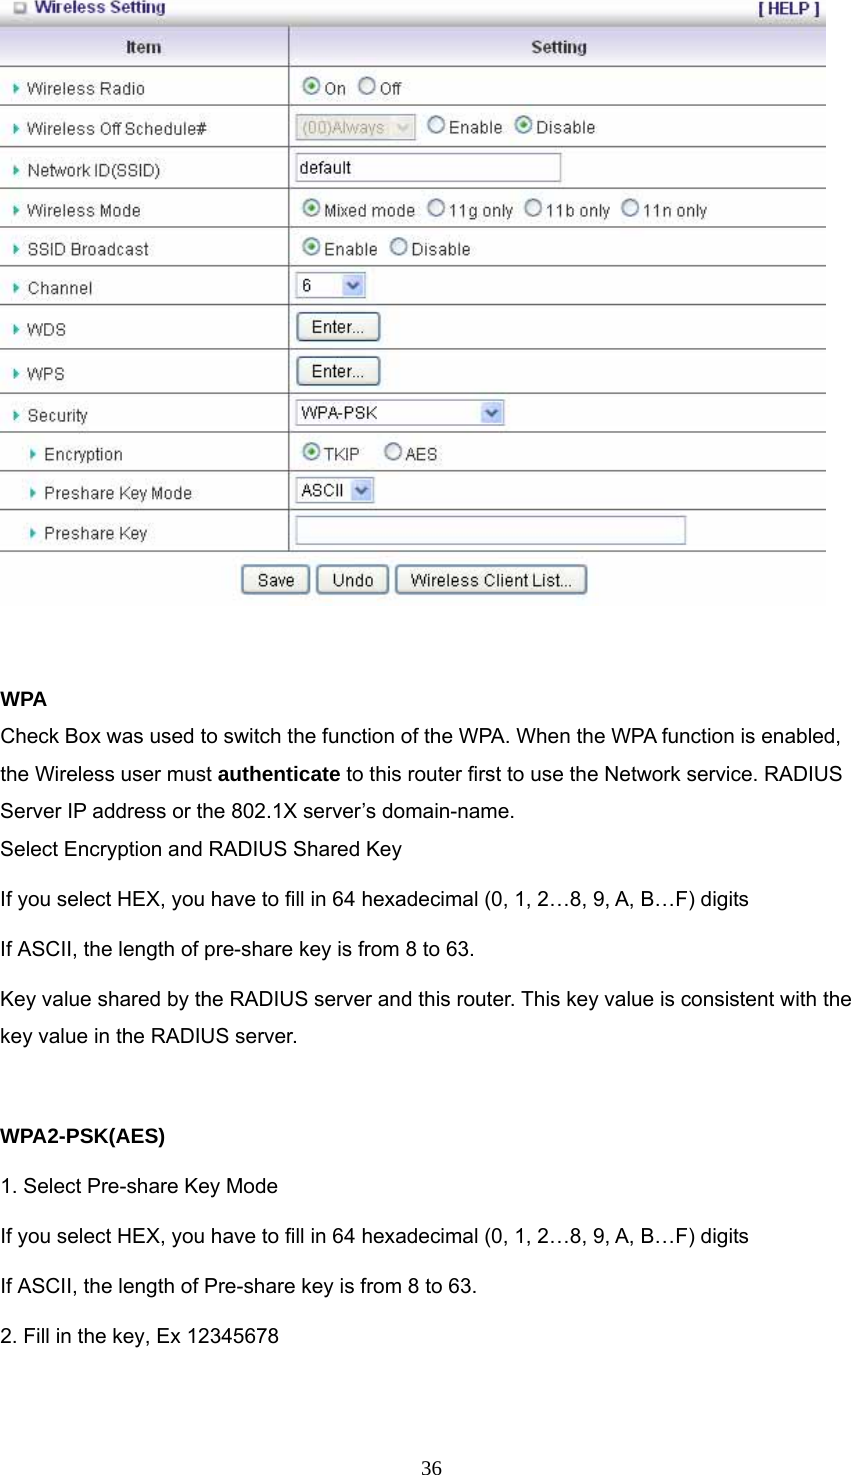  36  WPA Check Box was used to switch the function of the WPA. When the WPA function is enabled, the Wireless user must authenticate to this router first to use the Network service. RADIUS Server IP address or the 802.1X server’s domain-name.   Select Encryption and RADIUS Shared Key If you select HEX, you have to fill in 64 hexadecimal (0, 1, 2…8, 9, A, B…F) digits If ASCII, the length of pre-share key is from 8 to 63. Key value shared by the RADIUS server and this router. This key value is consistent with the key value in the RADIUS server.  WPA2-PSK(AES) 1. Select Pre-share Key Mode If you select HEX, you have to fill in 64 hexadecimal (0, 1, 2…8, 9, A, B…F) digits If ASCII, the length of Pre-share key is from 8 to 63. 2. Fill in the key, Ex 12345678  